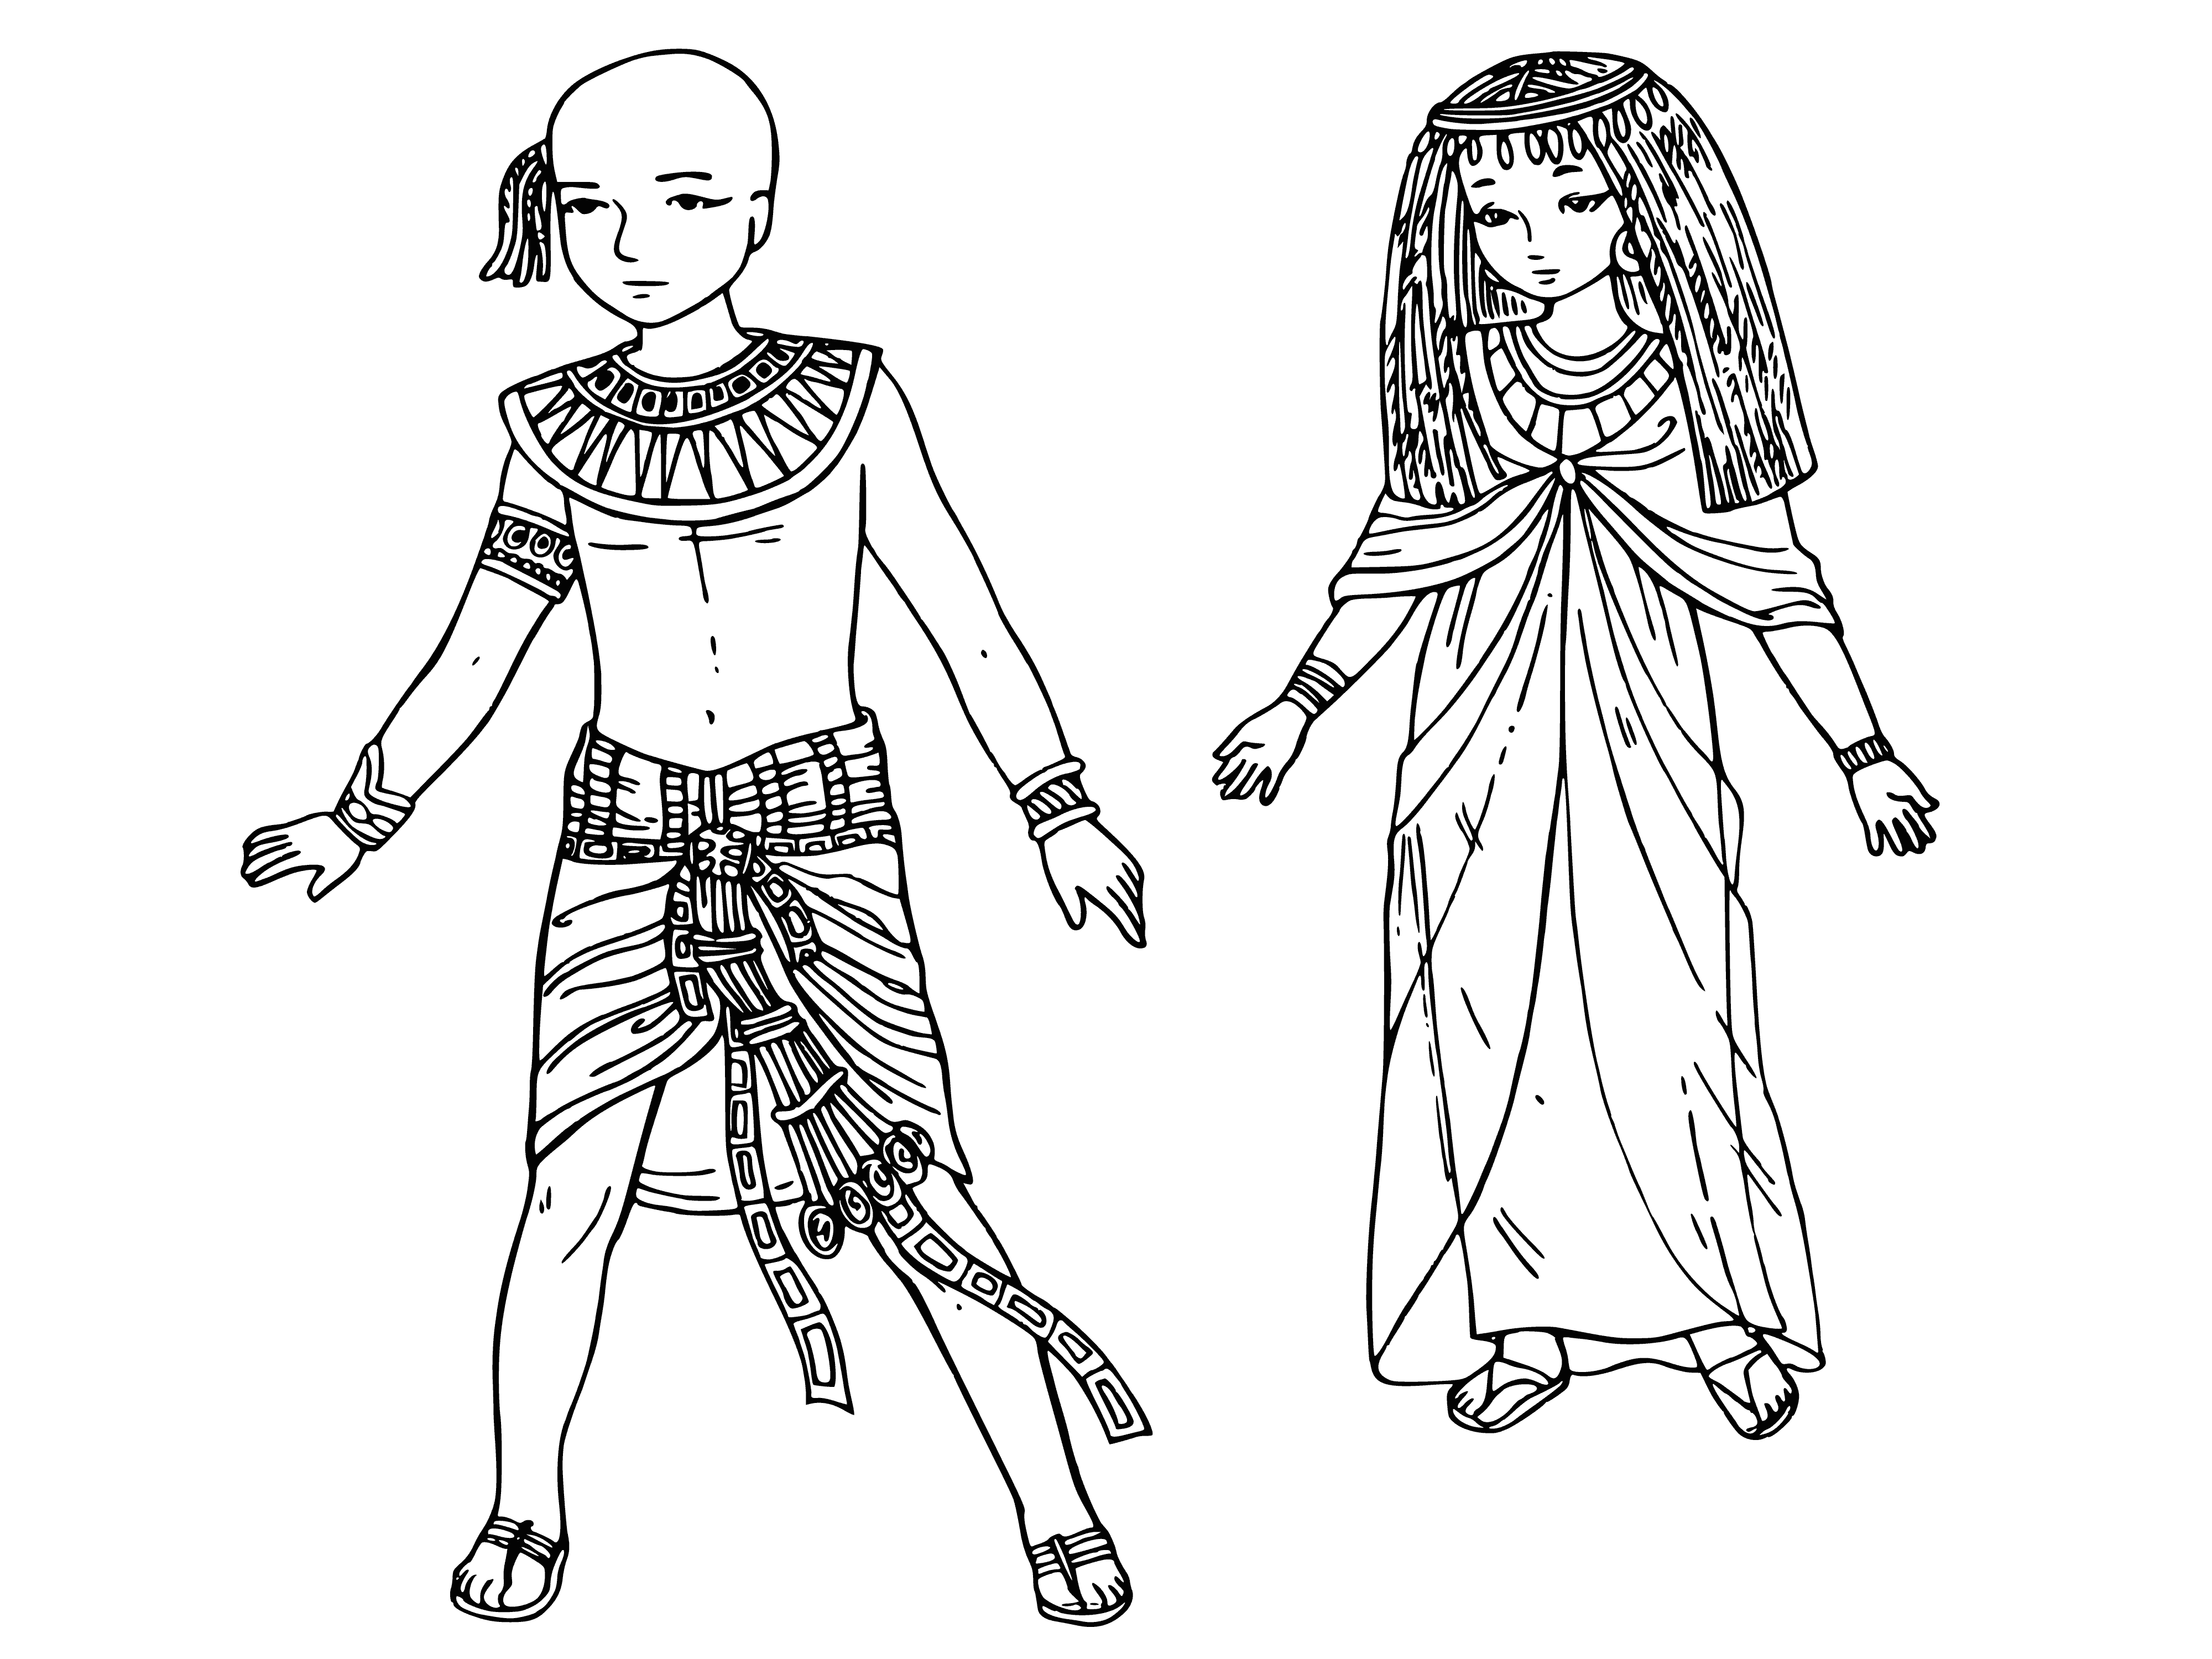 Children of Ancient Egypt coloring page